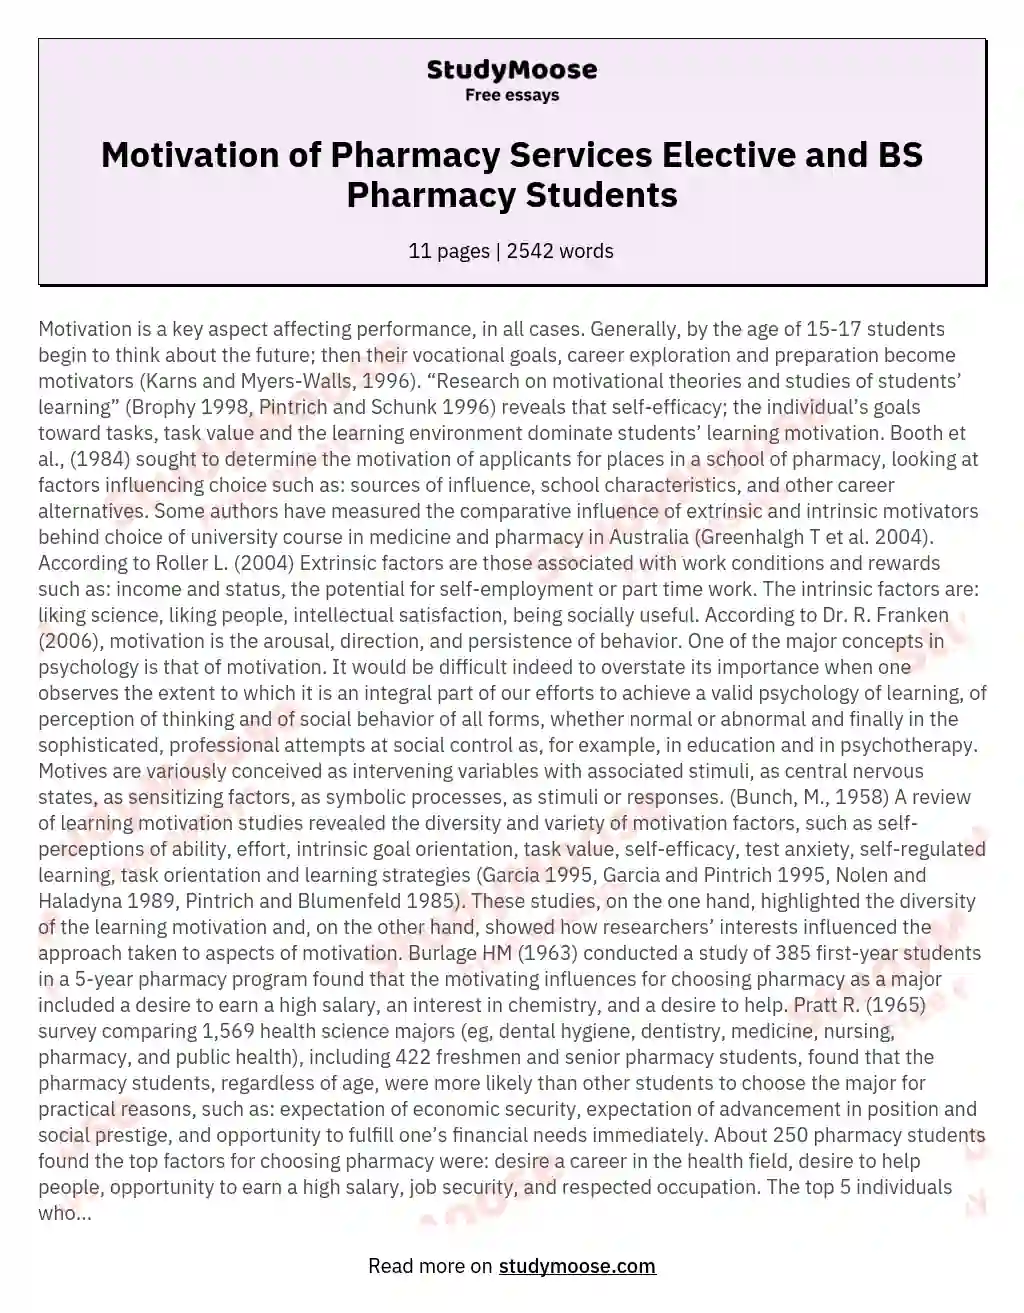 Motivation of Pharmacy Services Elective and BS Pharmacy Students essay